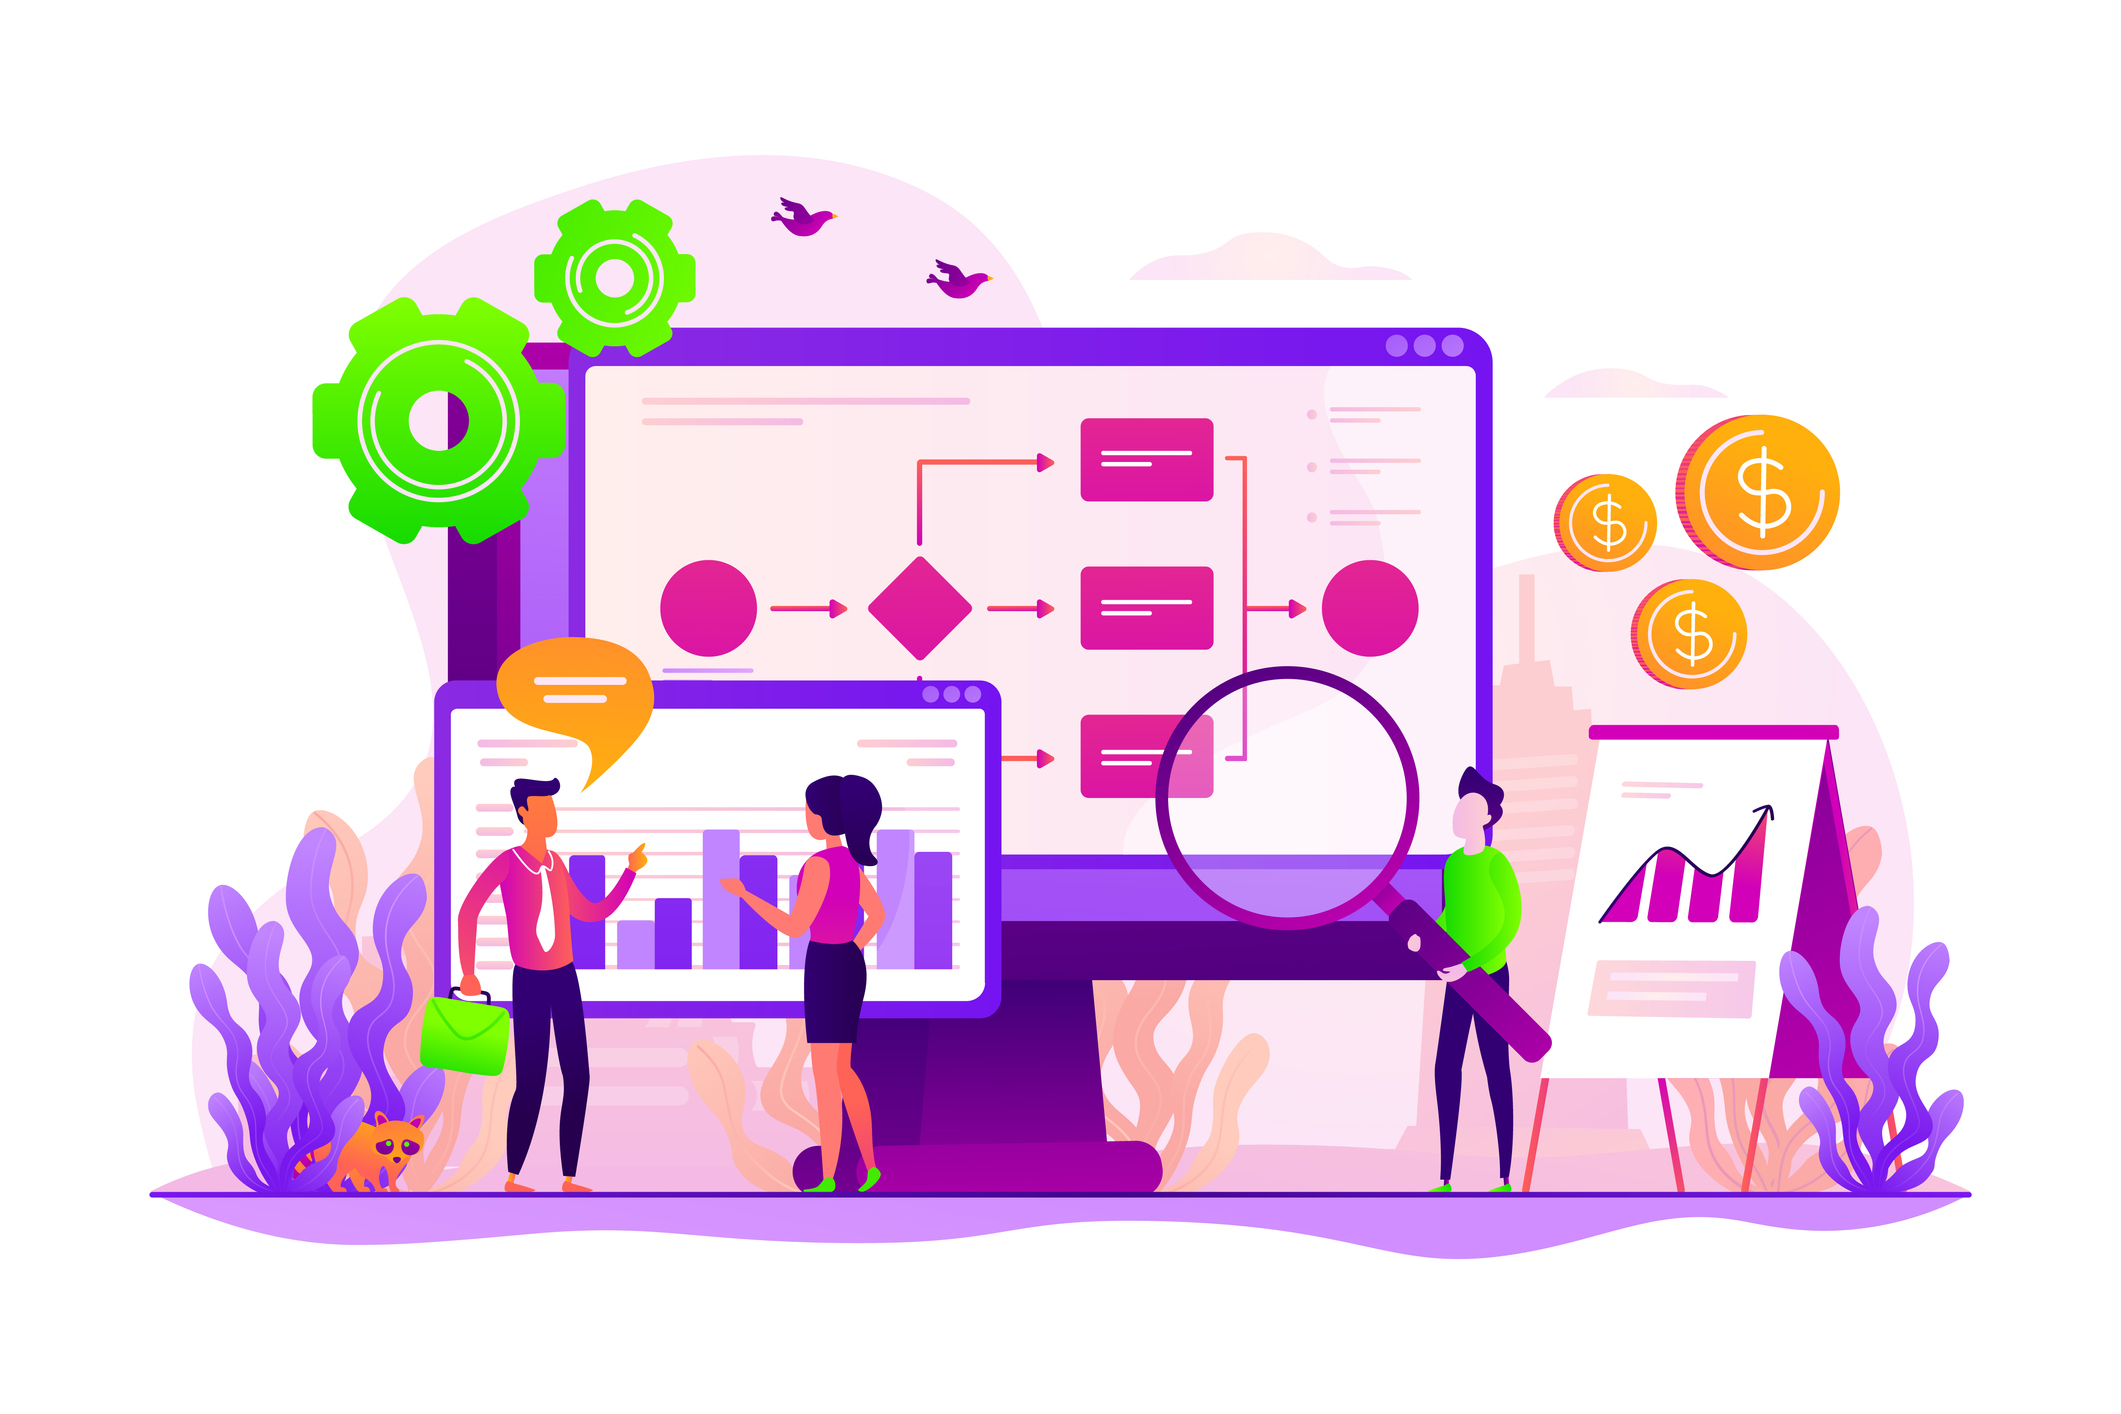 Business process organization and analytics. Business process visualization and representation, automated workflow system concept. Vector concept creative illustration